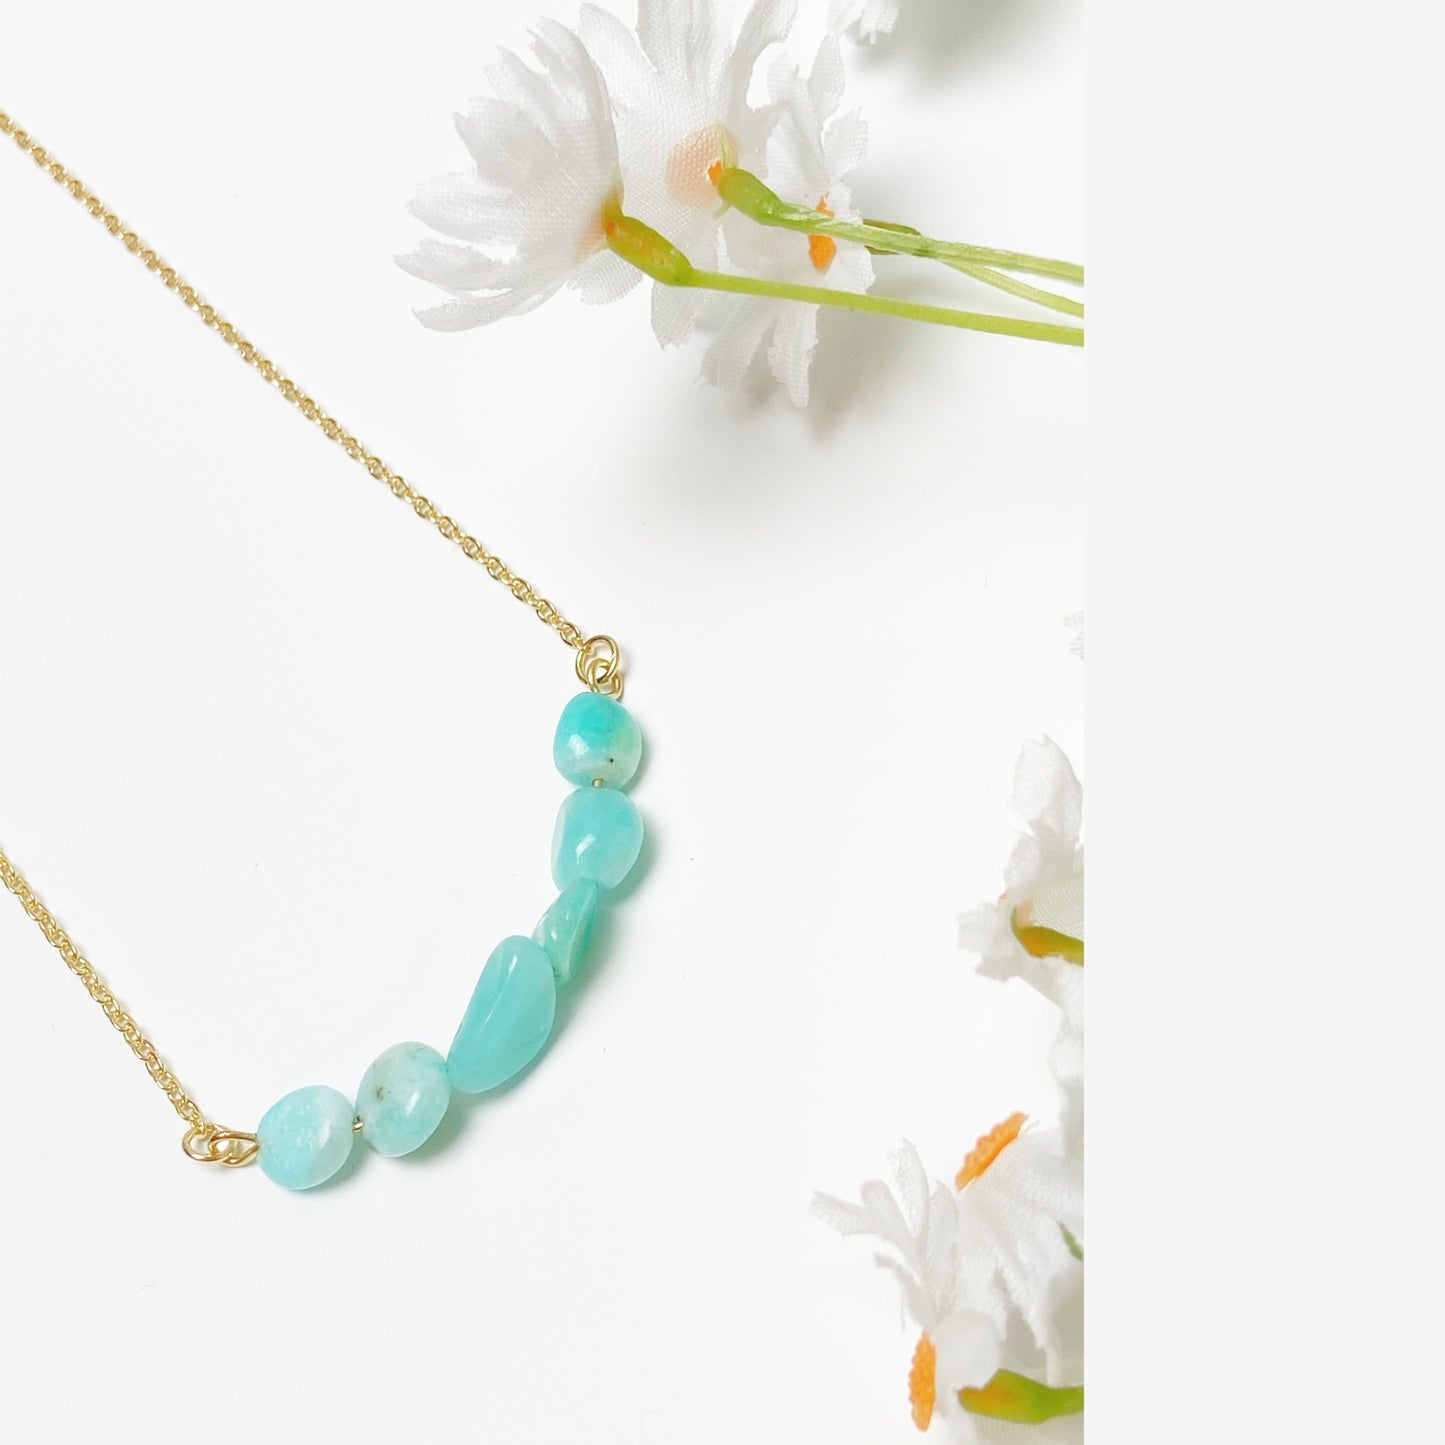 Raw Turquoise Healing Stone Necklace